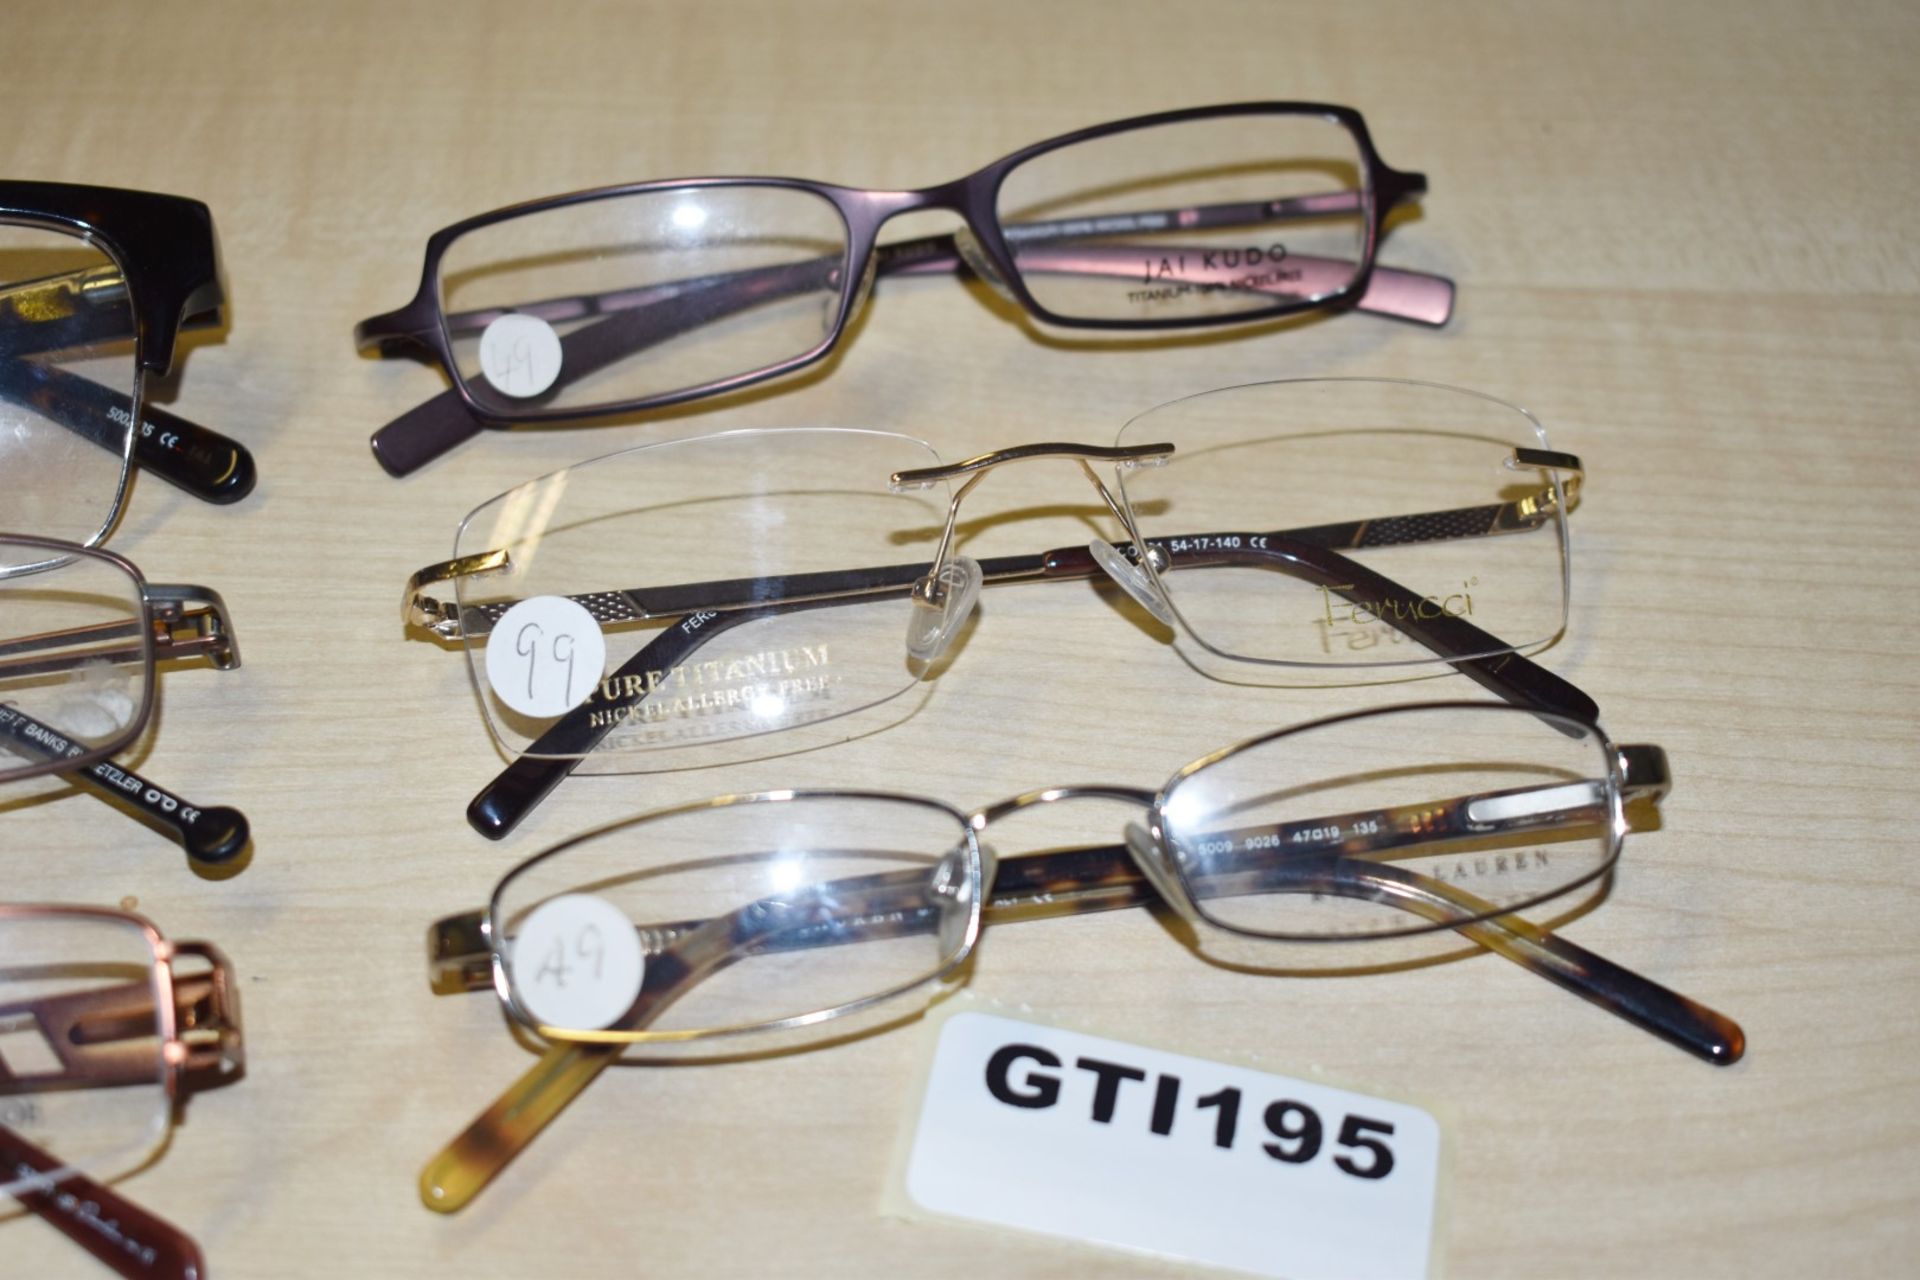 6 x Assorted Pairs of Designer Spectacle Eye Glasses - Ex Display Stock - Brands Include Jeff Banks, - Image 3 of 10